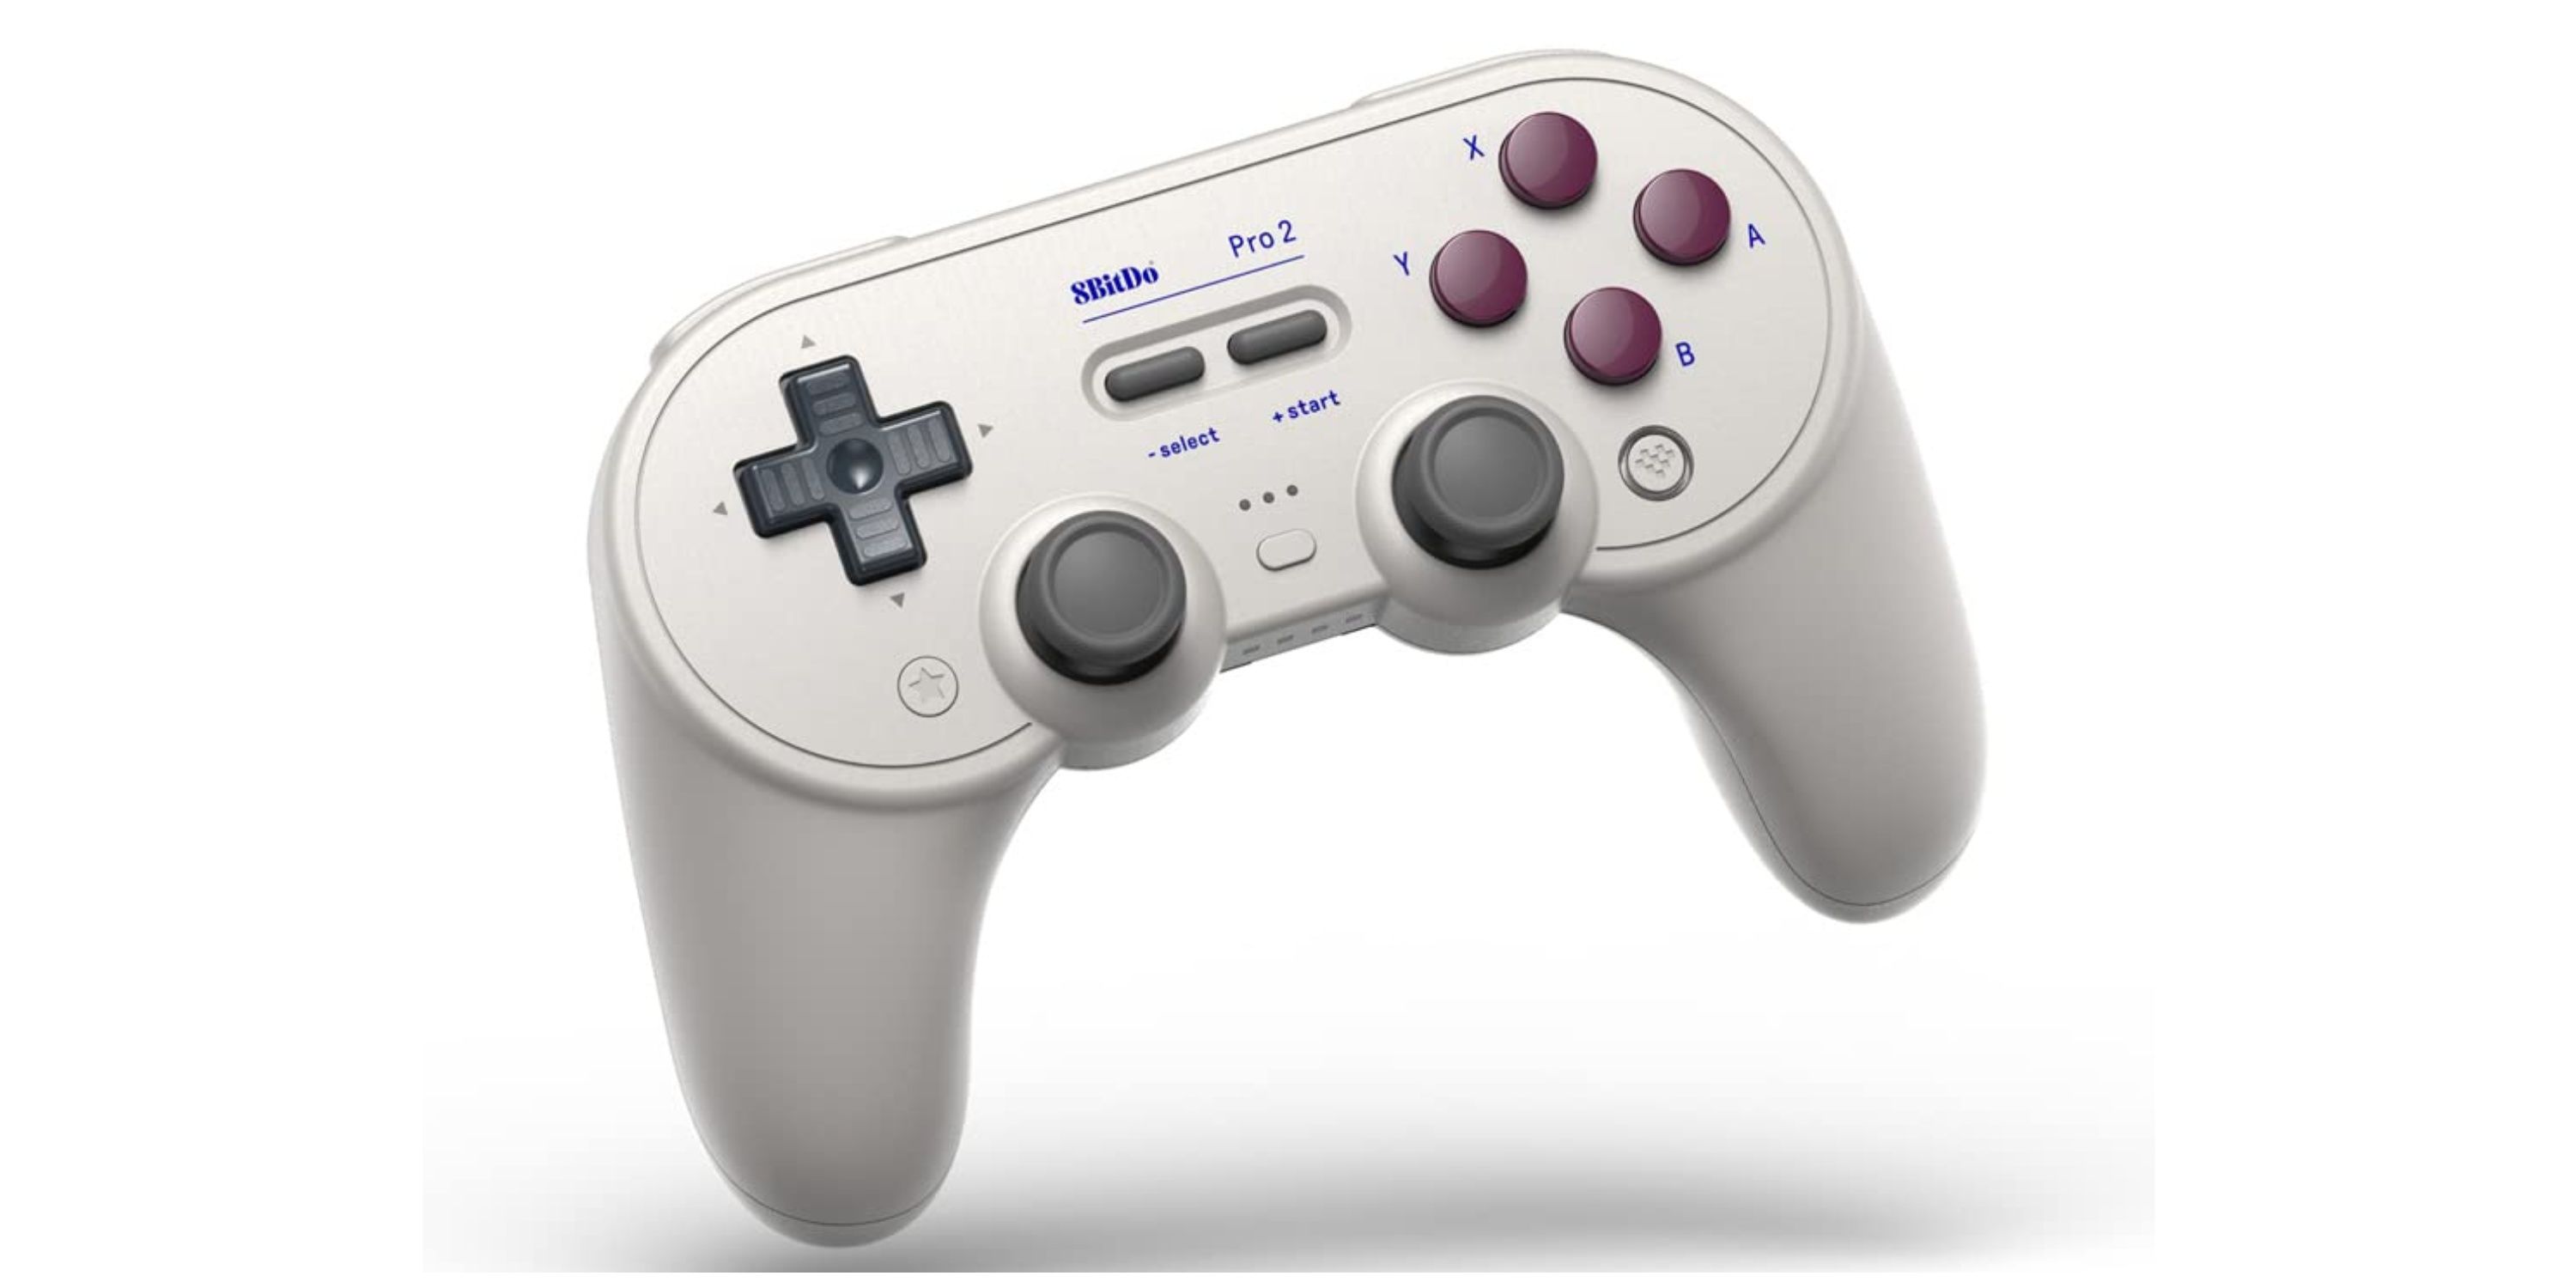 8BitDo reveals an Xbox-style controller with pro back paddle buttons -   News